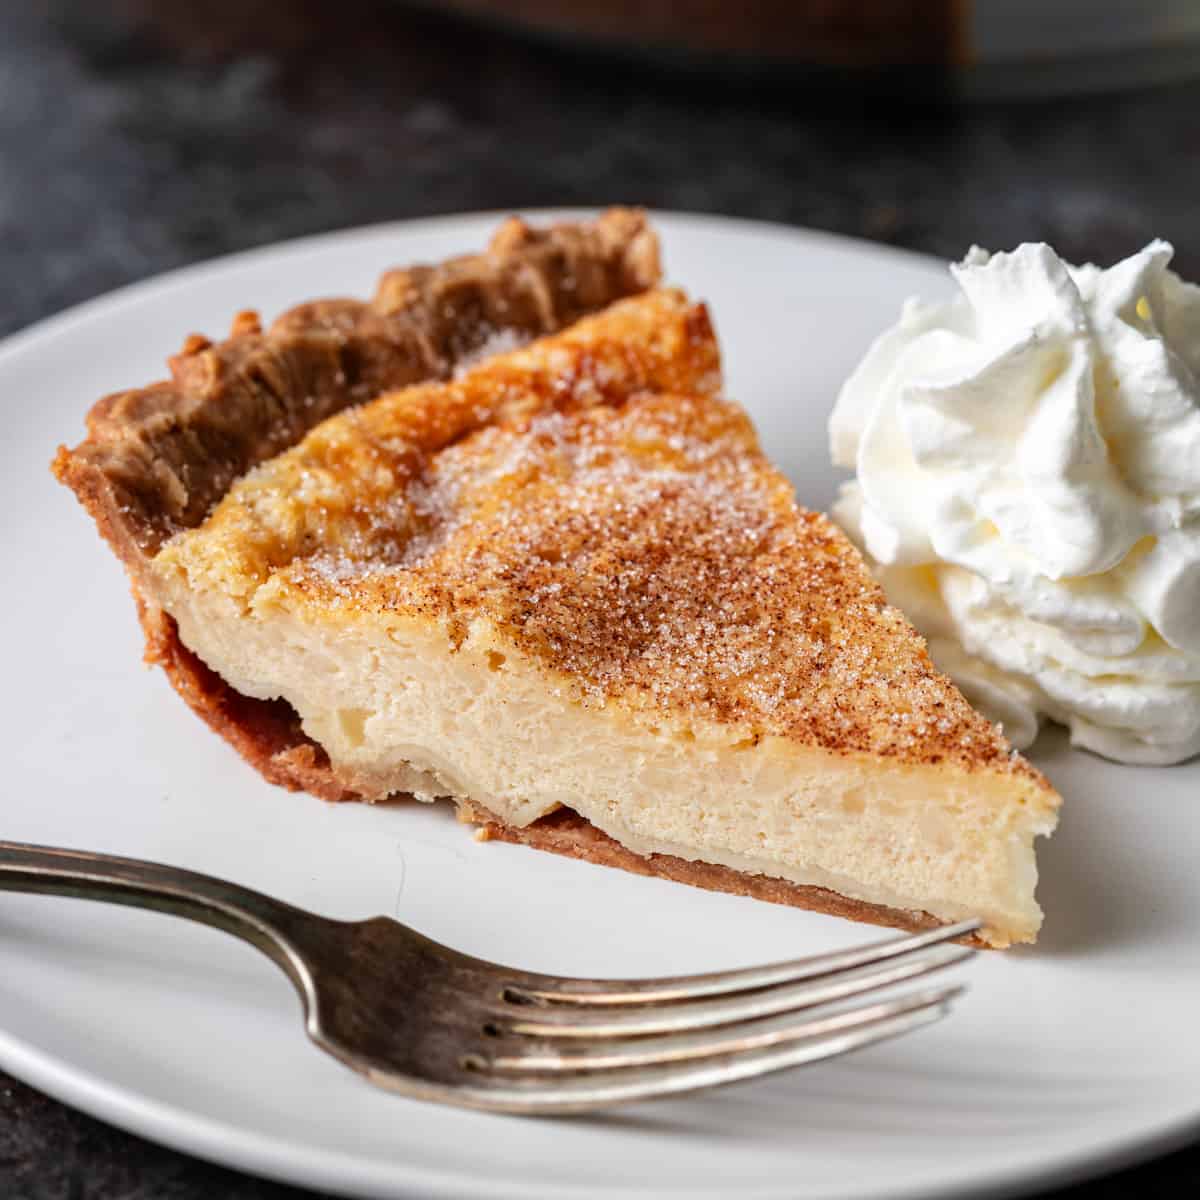 side view: a slice of buttermilk pie on a plate with whipped cream and a fork